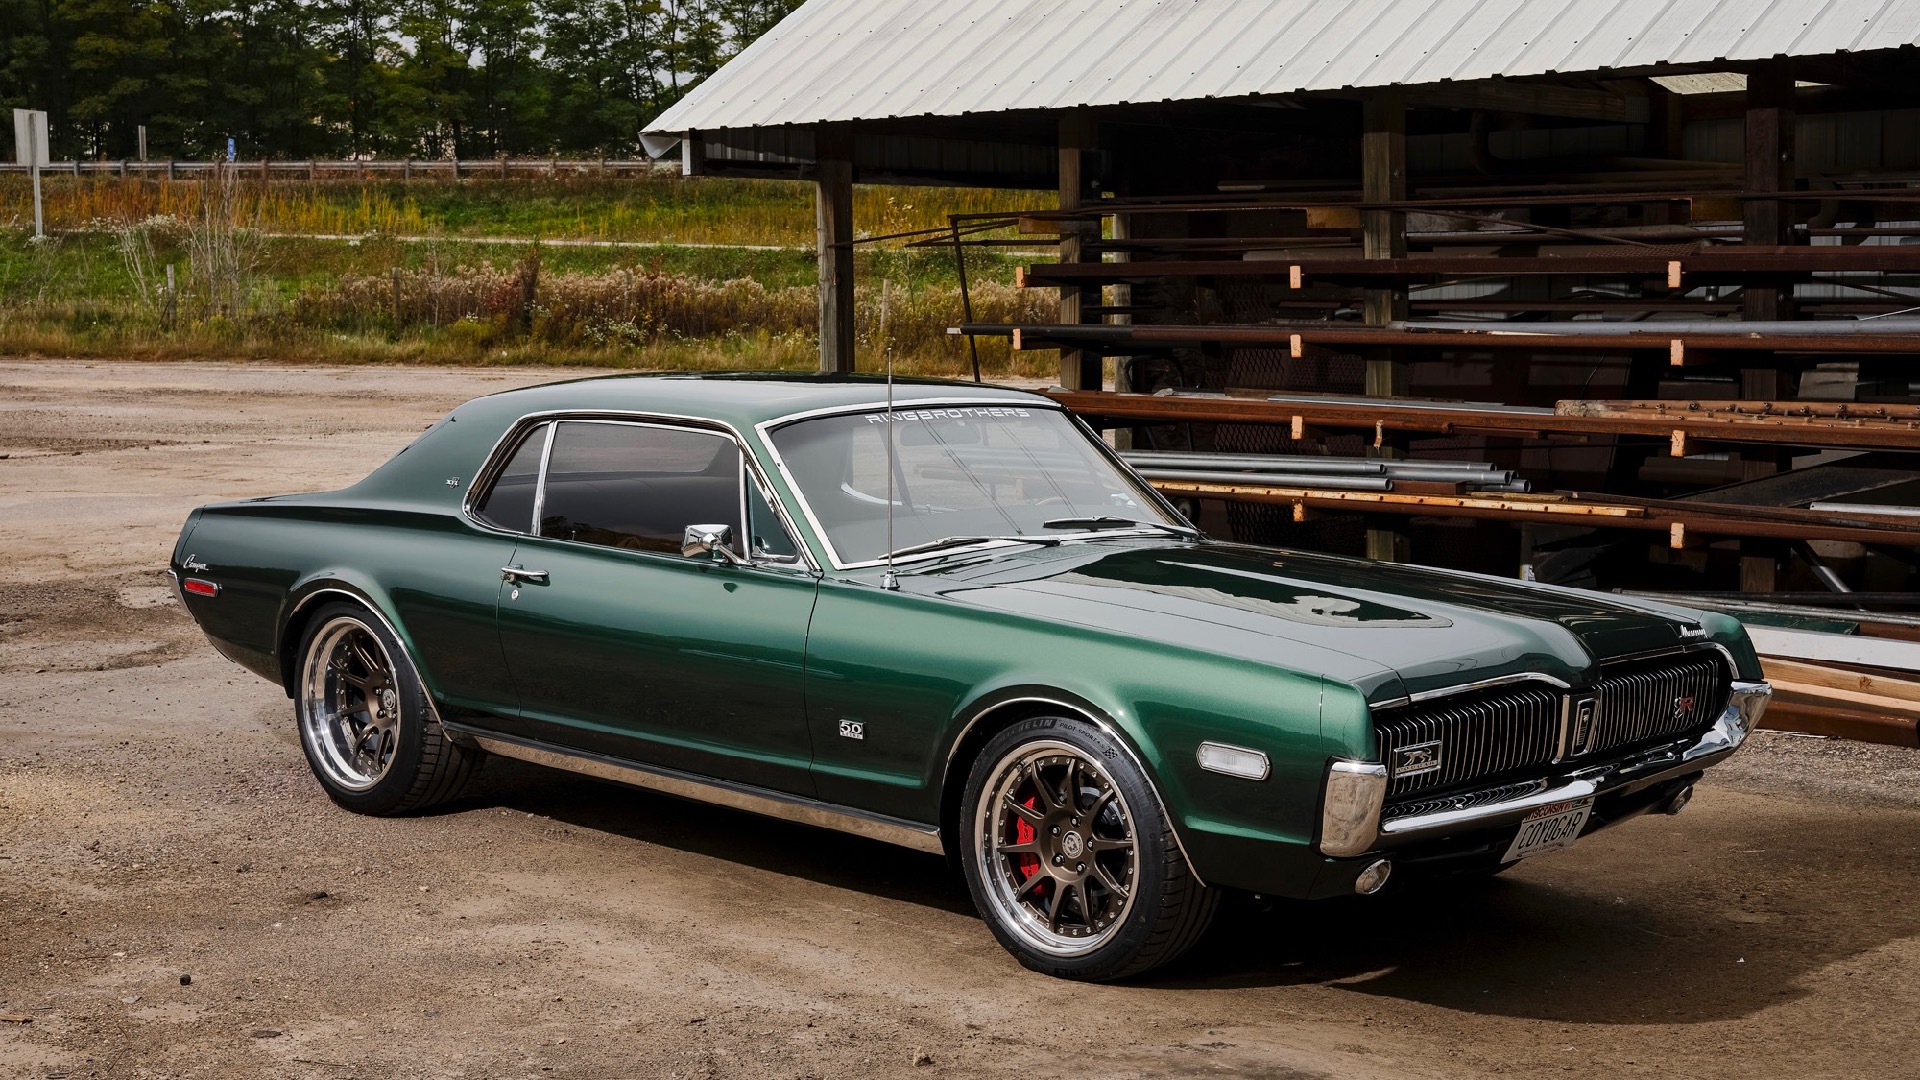 1968 Ring Brothers Mercury Cougar combines old-school style with modern running clothes